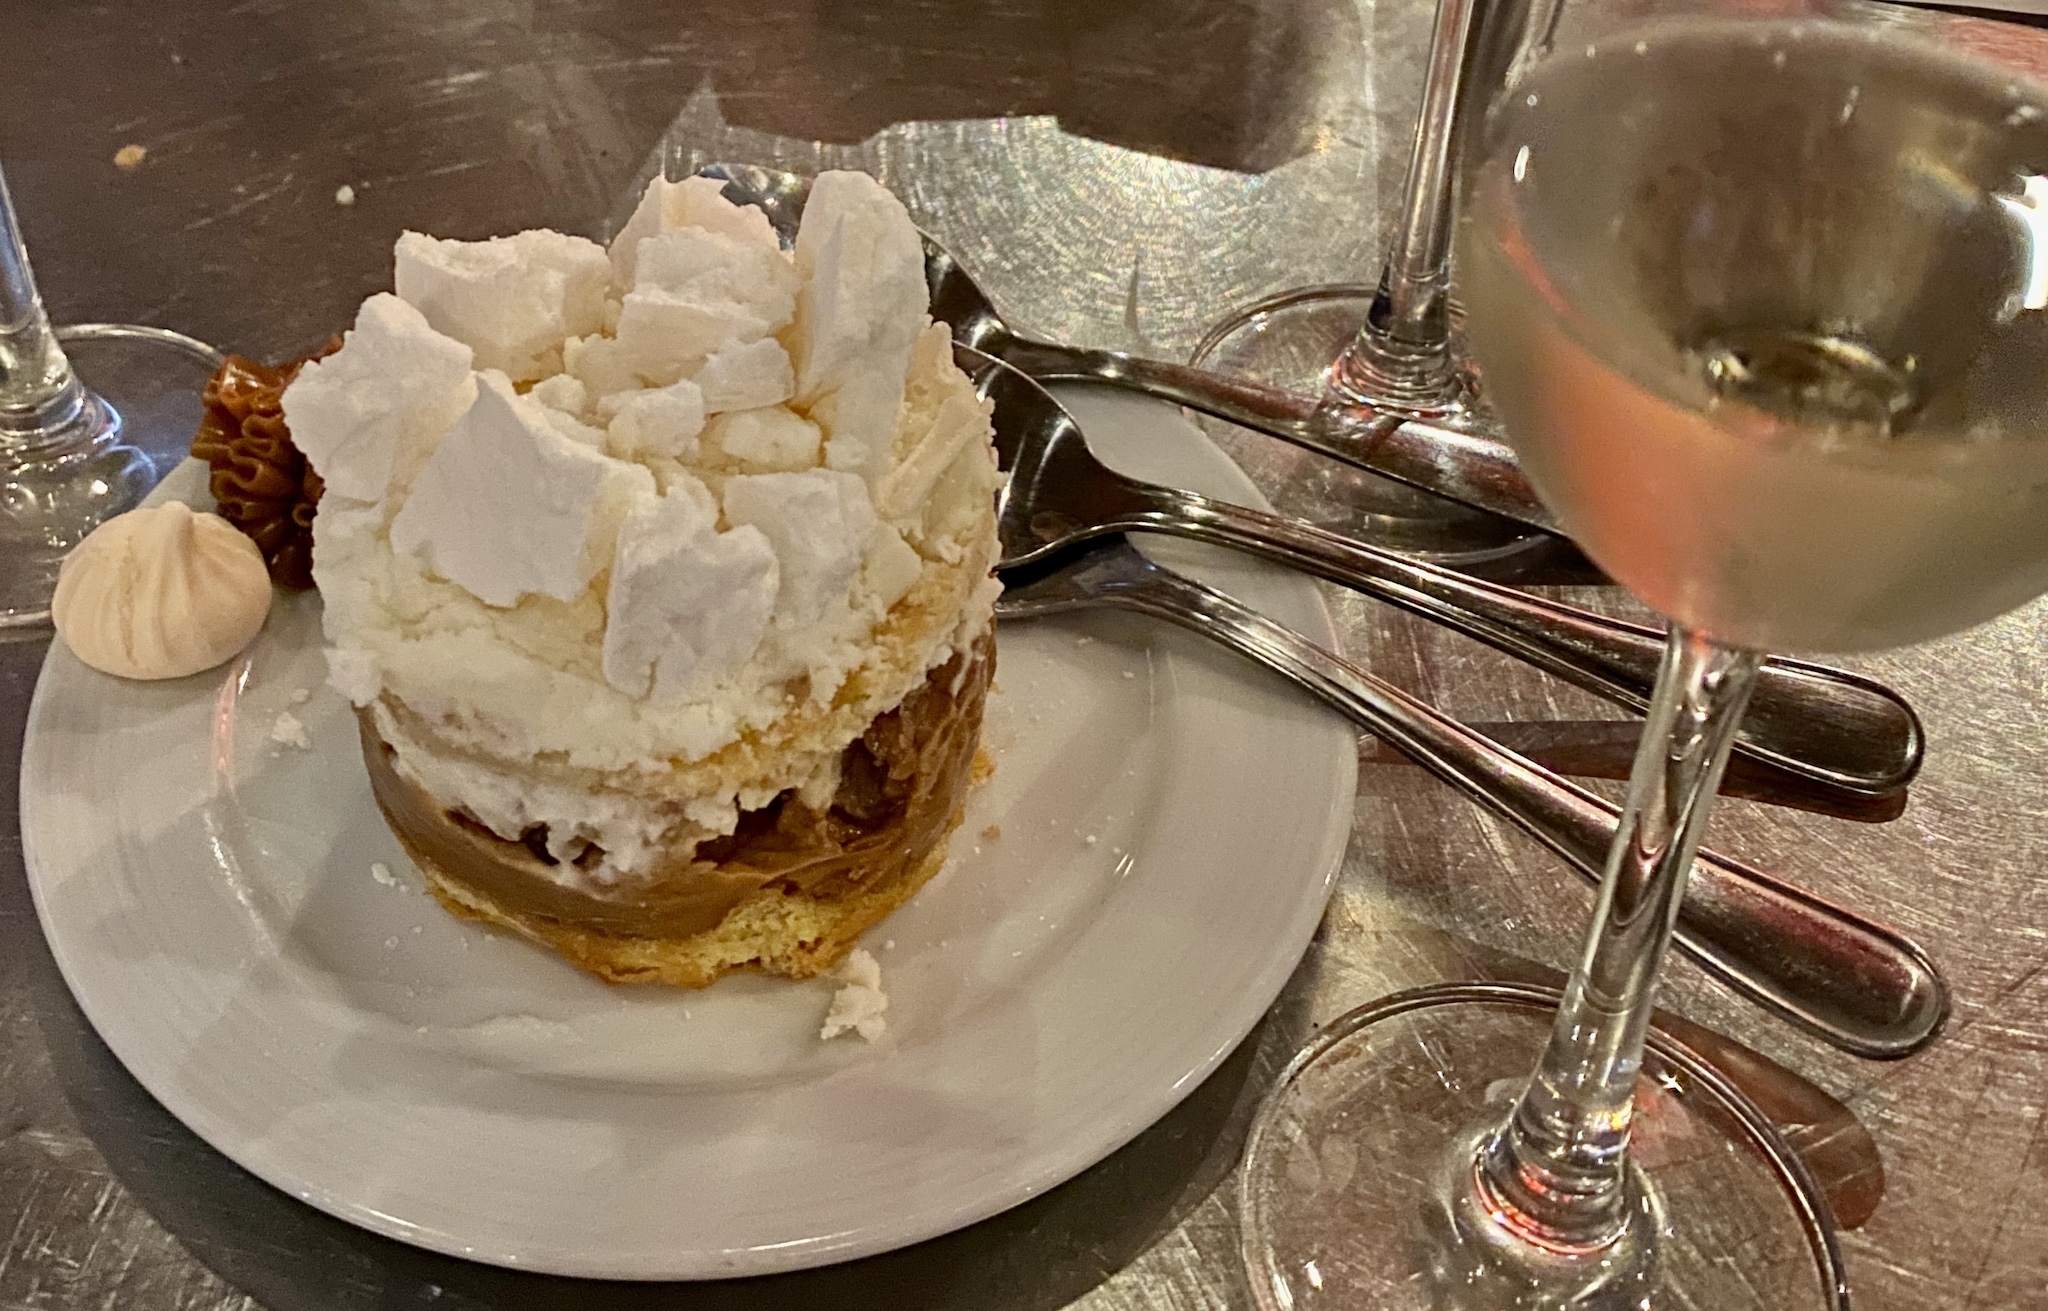 Chaja - Renzo's signature dessert. Home-made sponge cake, layered with dulce de leche caramel, peaches and walnuts. Covered in chantilly and topped with meringue crumbles